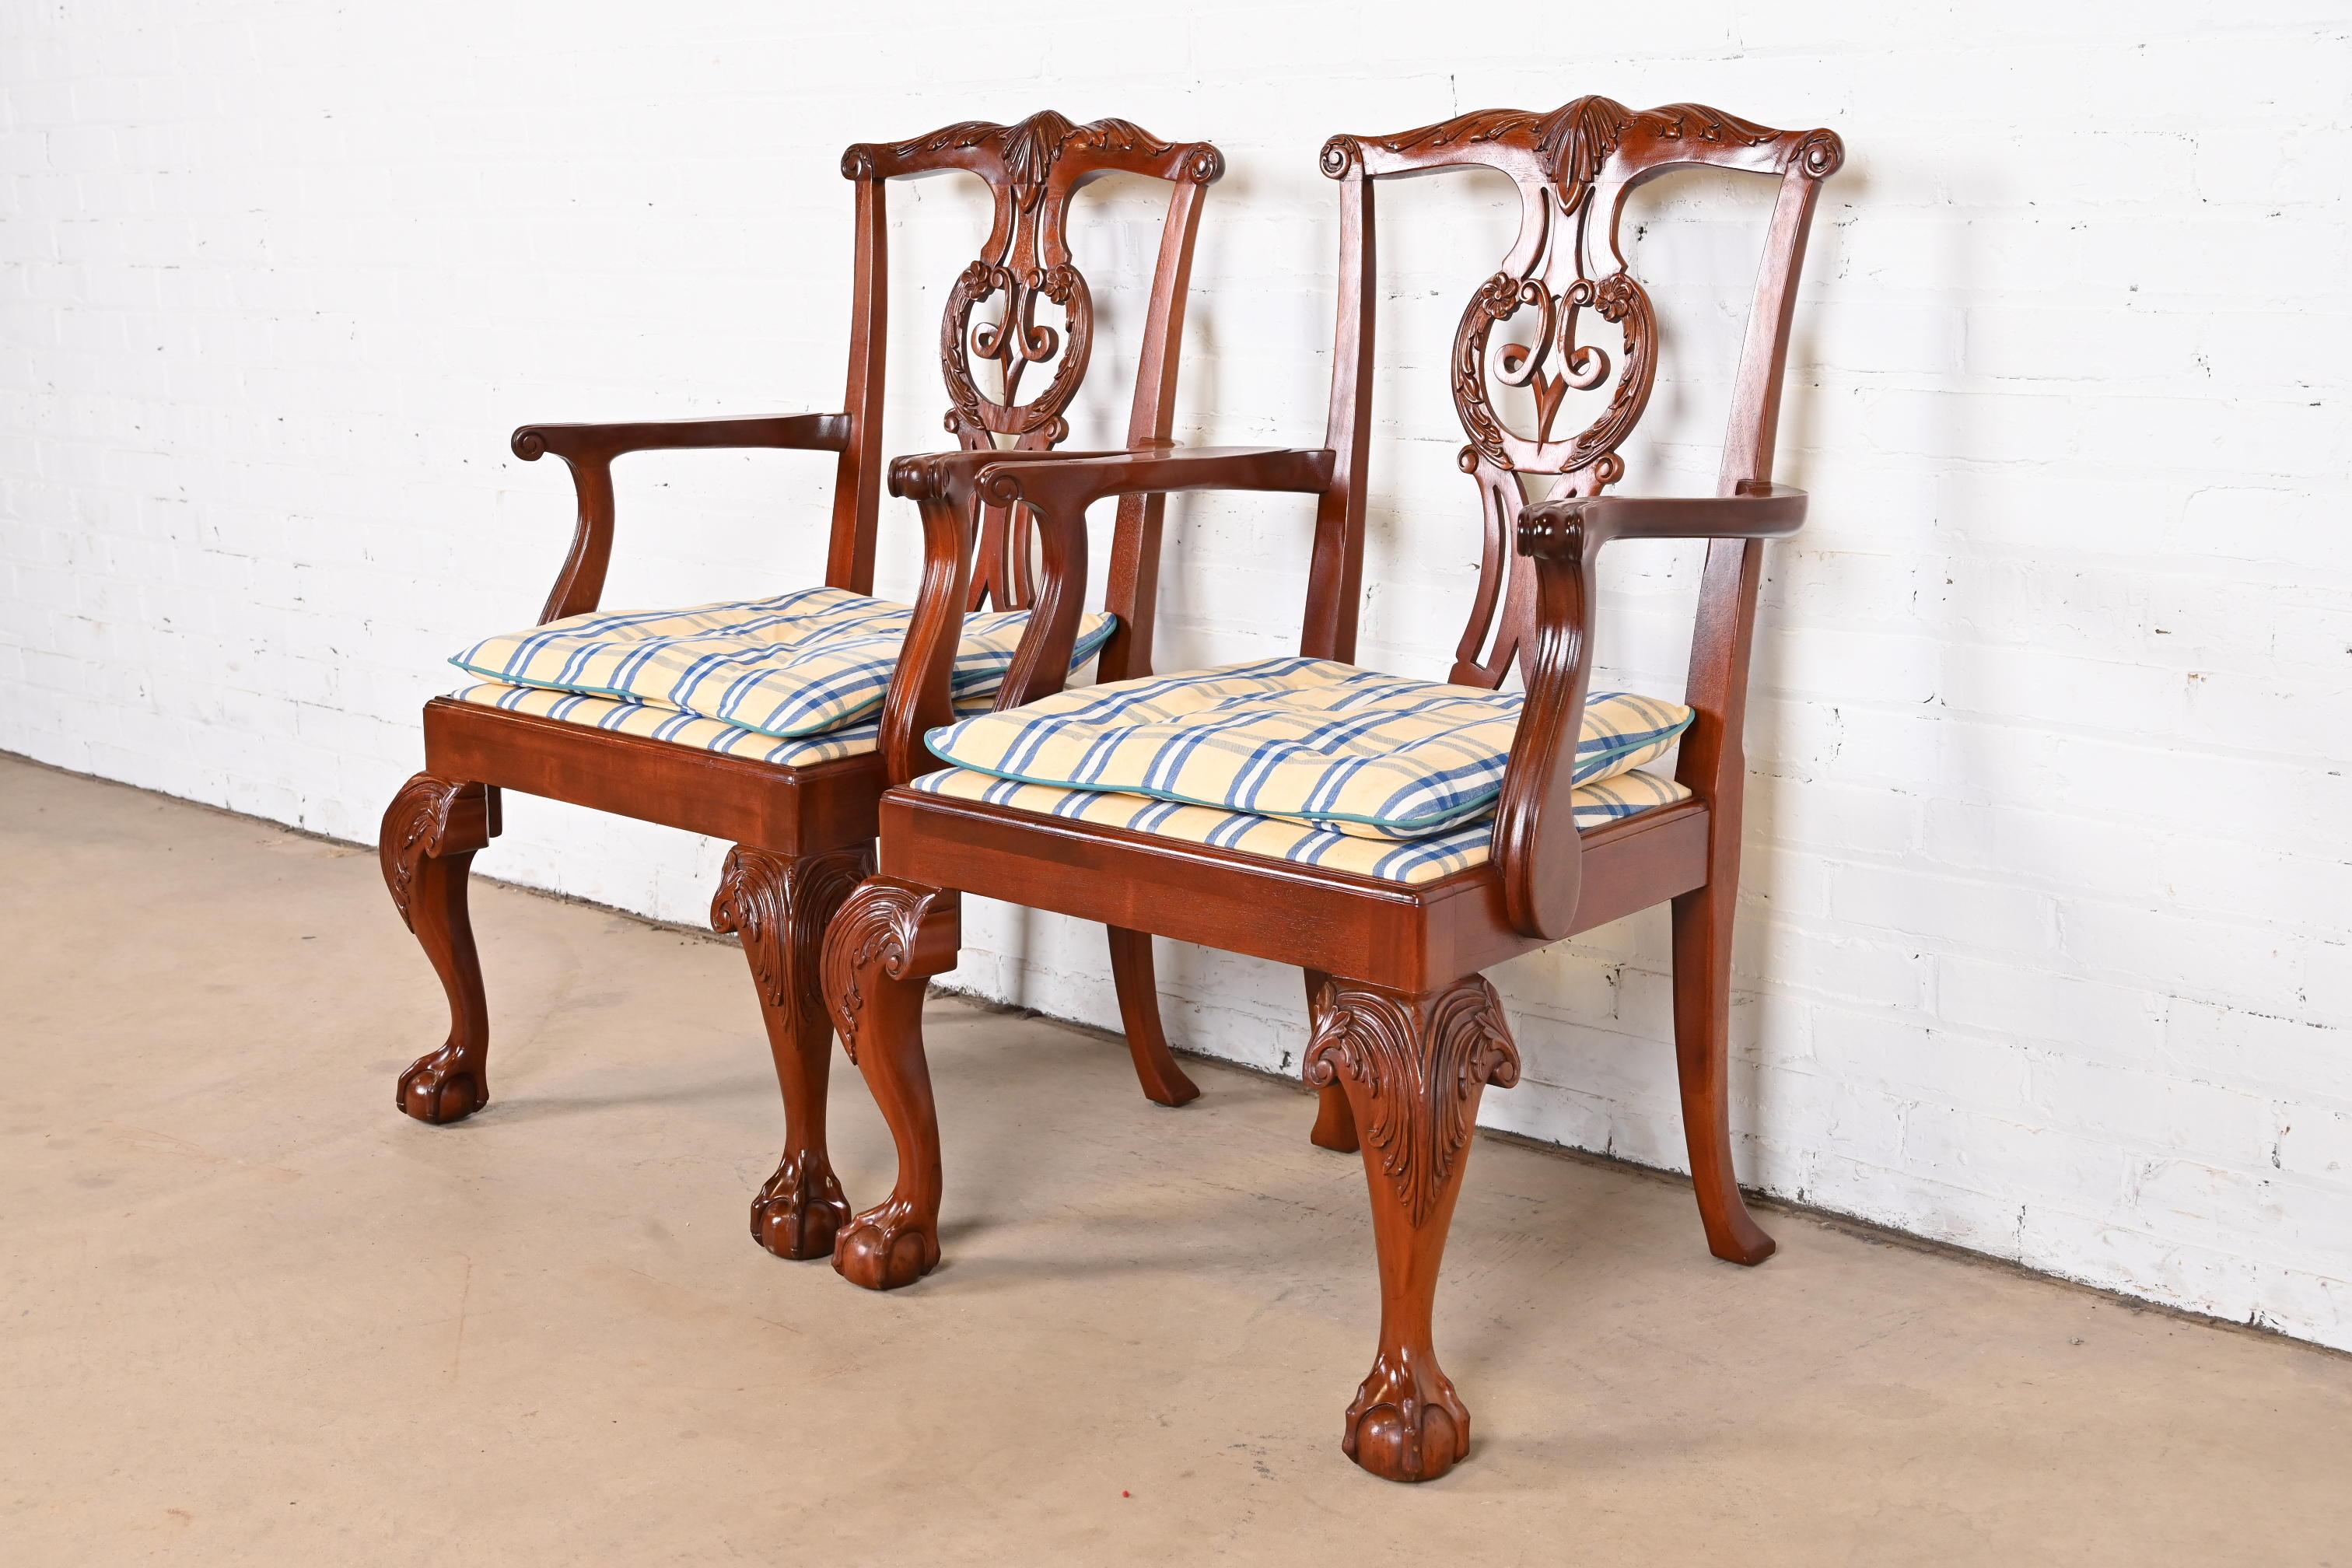 An outstanding pair of Chippendale or Georgian style armchairs

By Baker Furniture

USA, circa 1980s

Carved solid mahogany frames, with cabriole legs and ball and claw feet, and Ralph Lauren style plaid upholstery.

Measures: 25.75